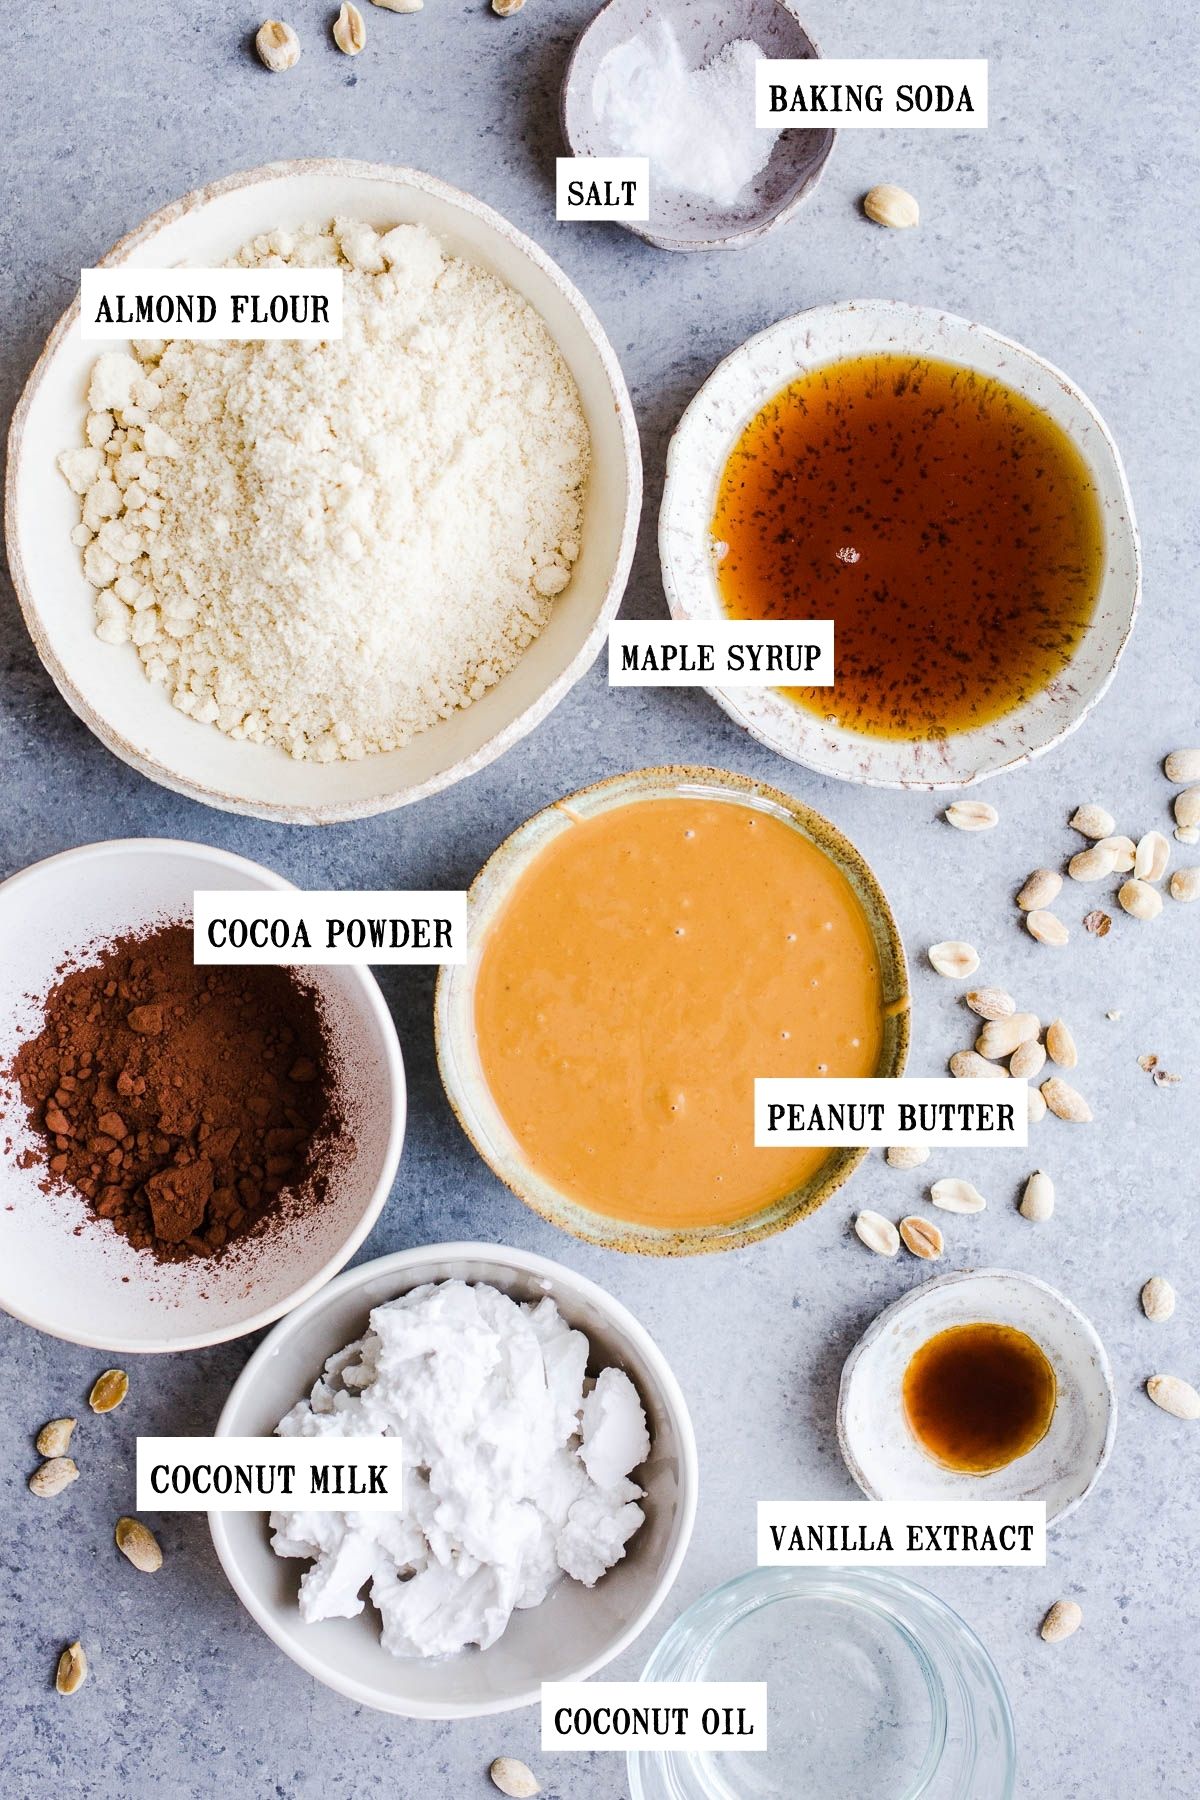 Ingredients for frozen pie in small ceramic bowls on a gray surface.